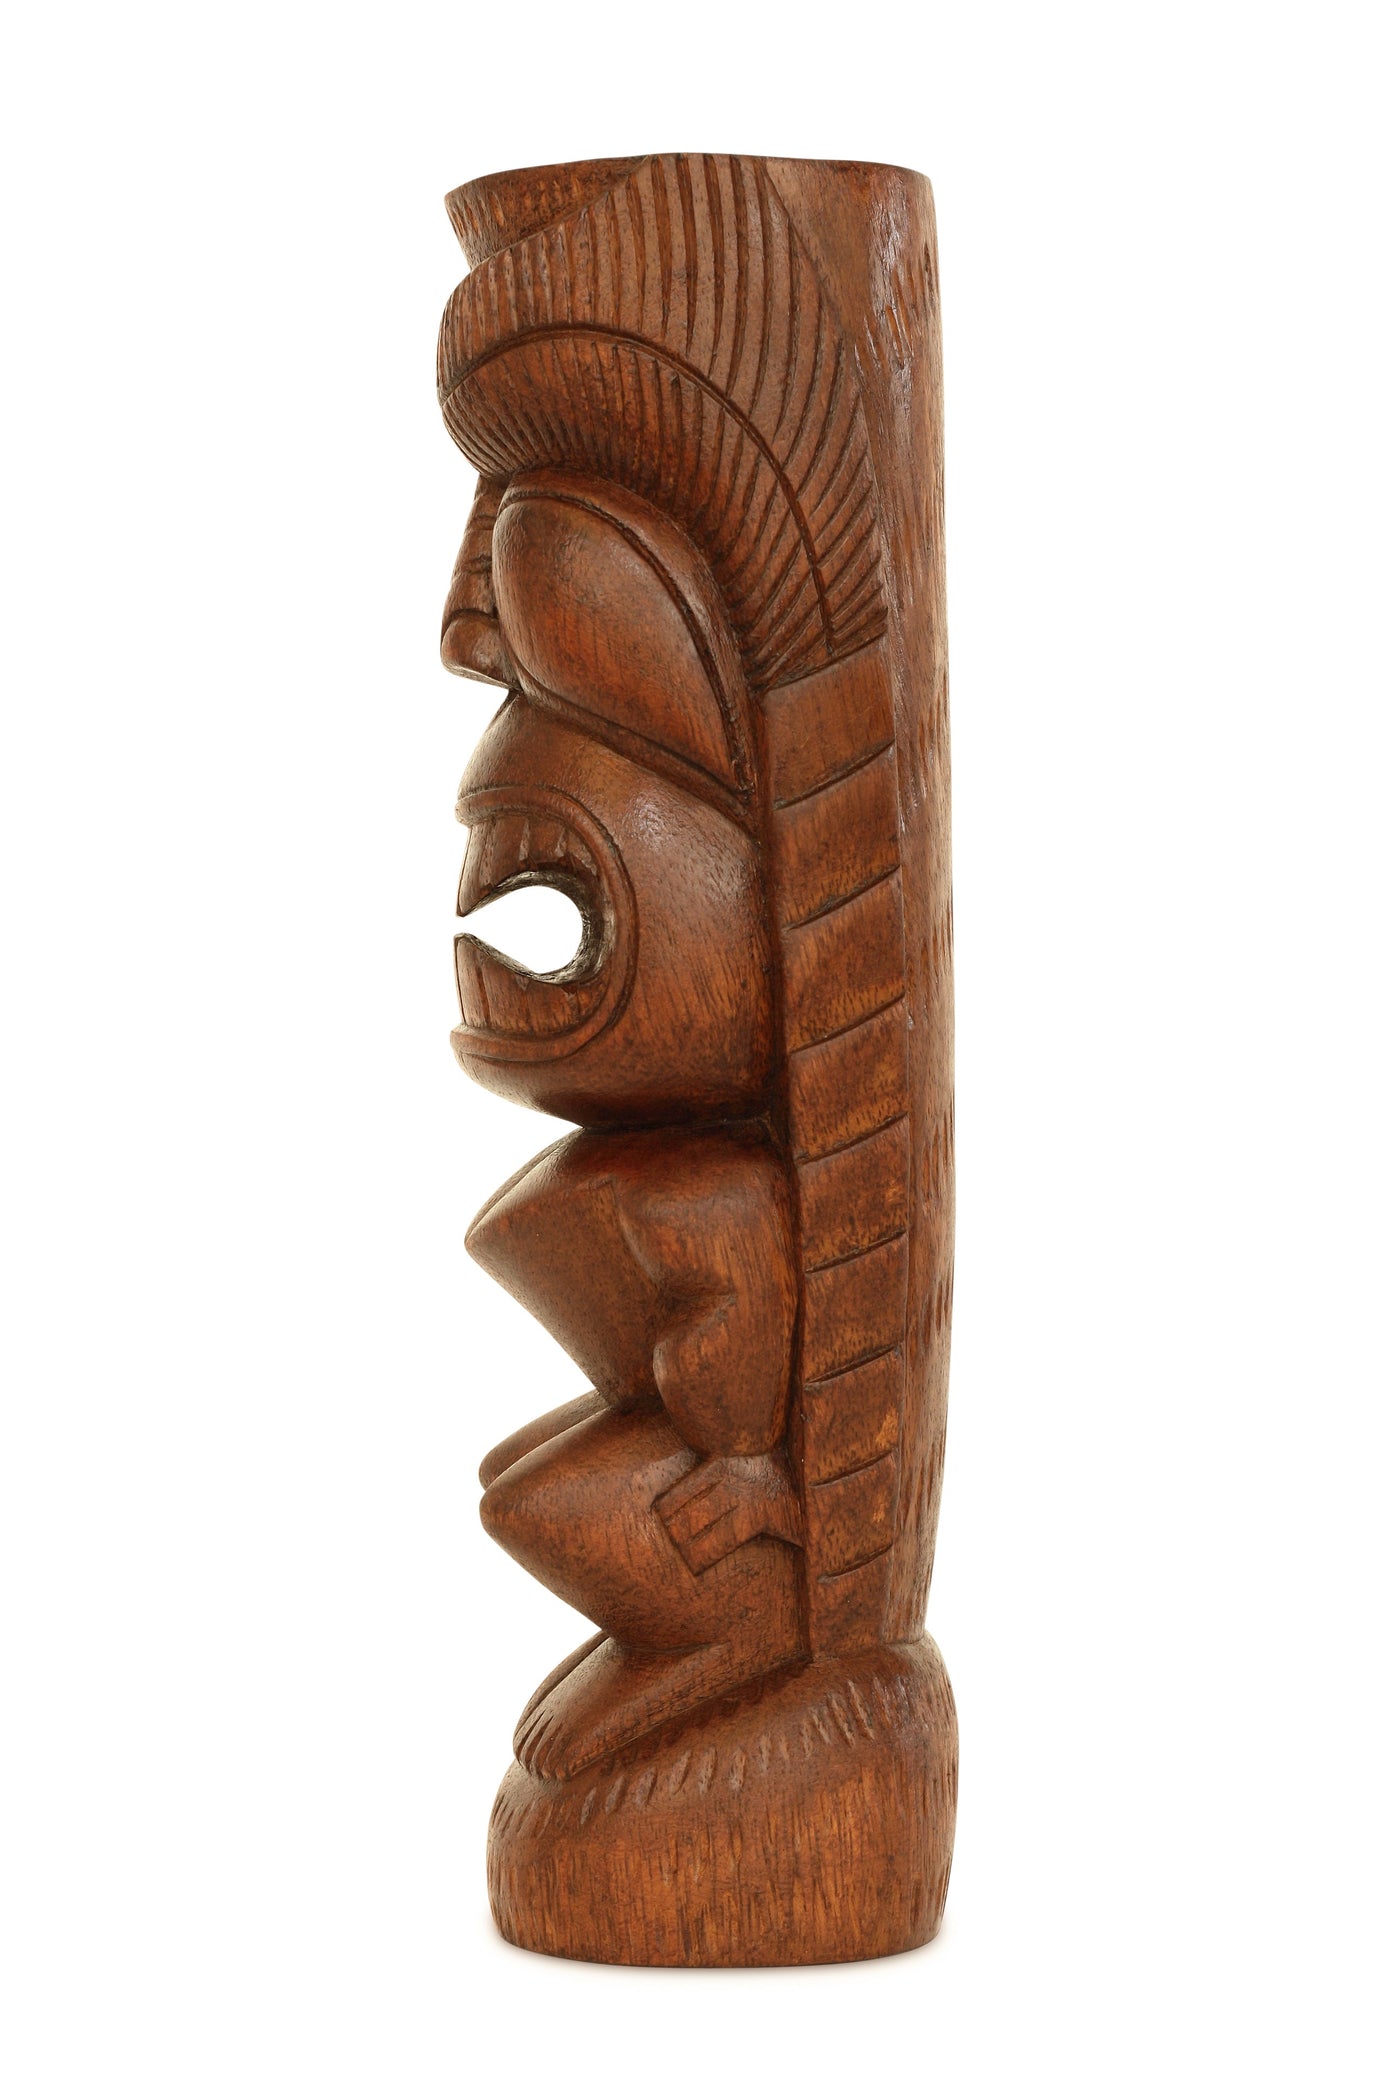 12" Handmade Wooden Primitive Long Hair Tribal Statue Sculpture Tiki Bar Totem Handcrafted Unique Gift Home Decor Accent Figurine Artwork Hand Carved